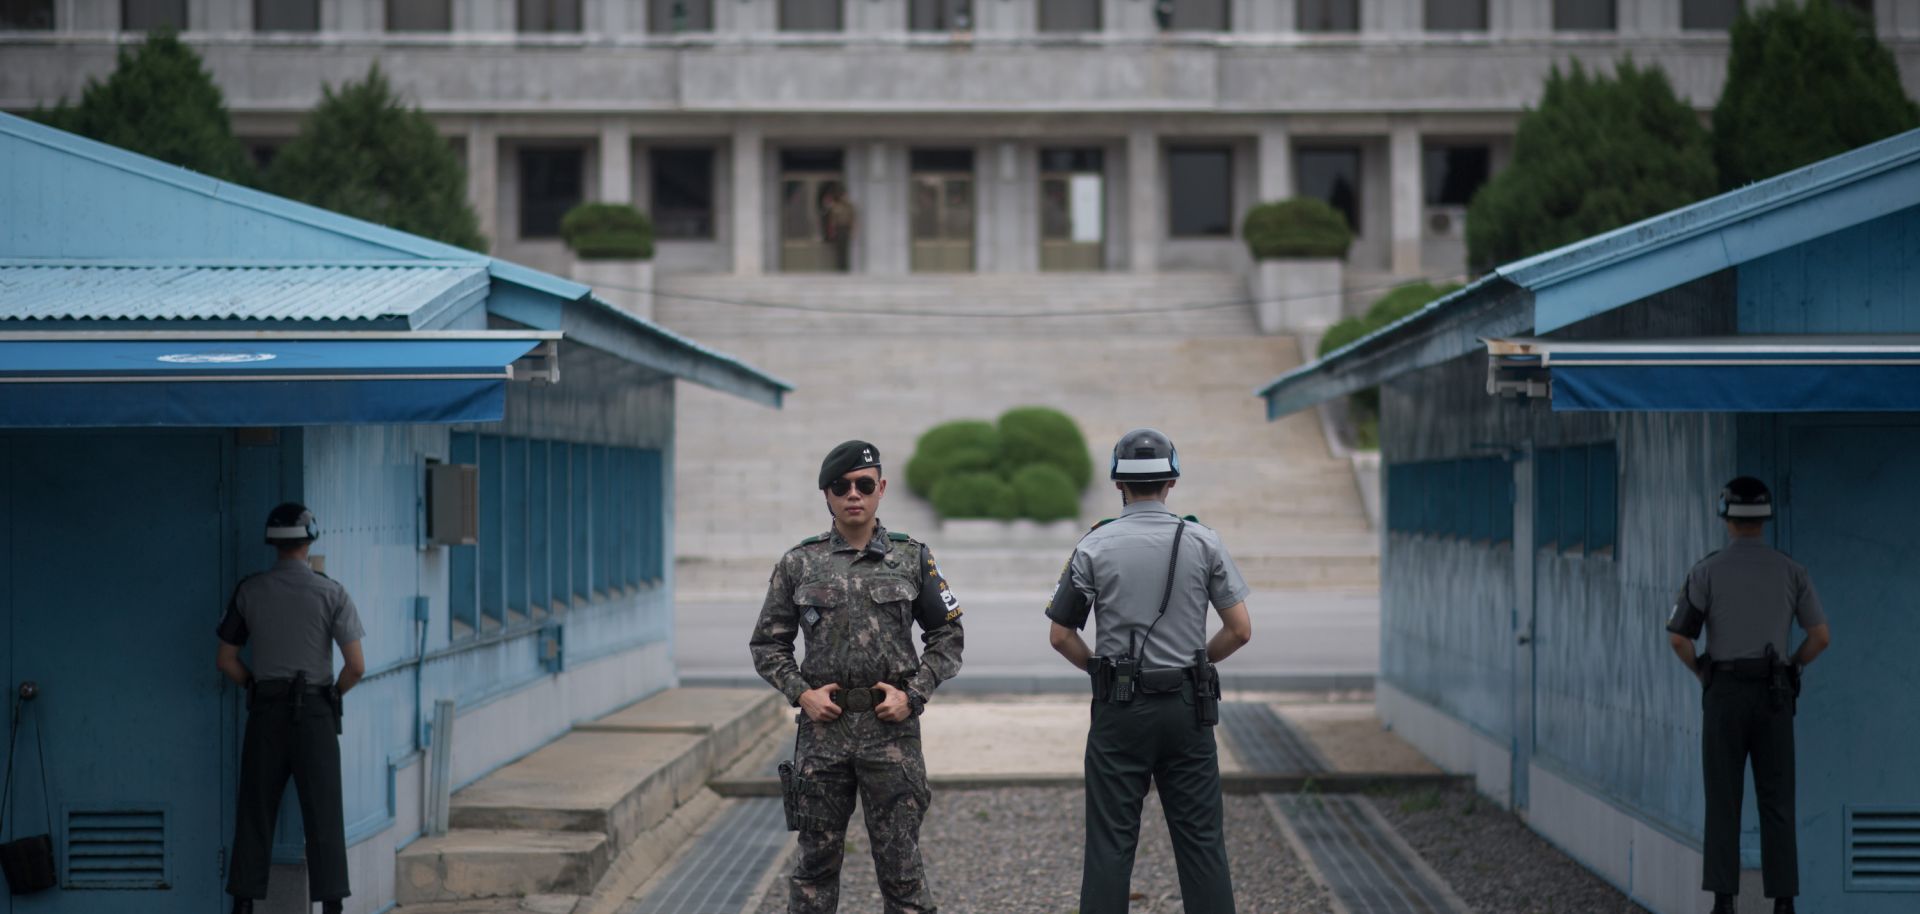 South Korean soldiers stand on duty at the Demilitarized Zone along the 38th parallel, the line distinguishing North Korea from South Korea.